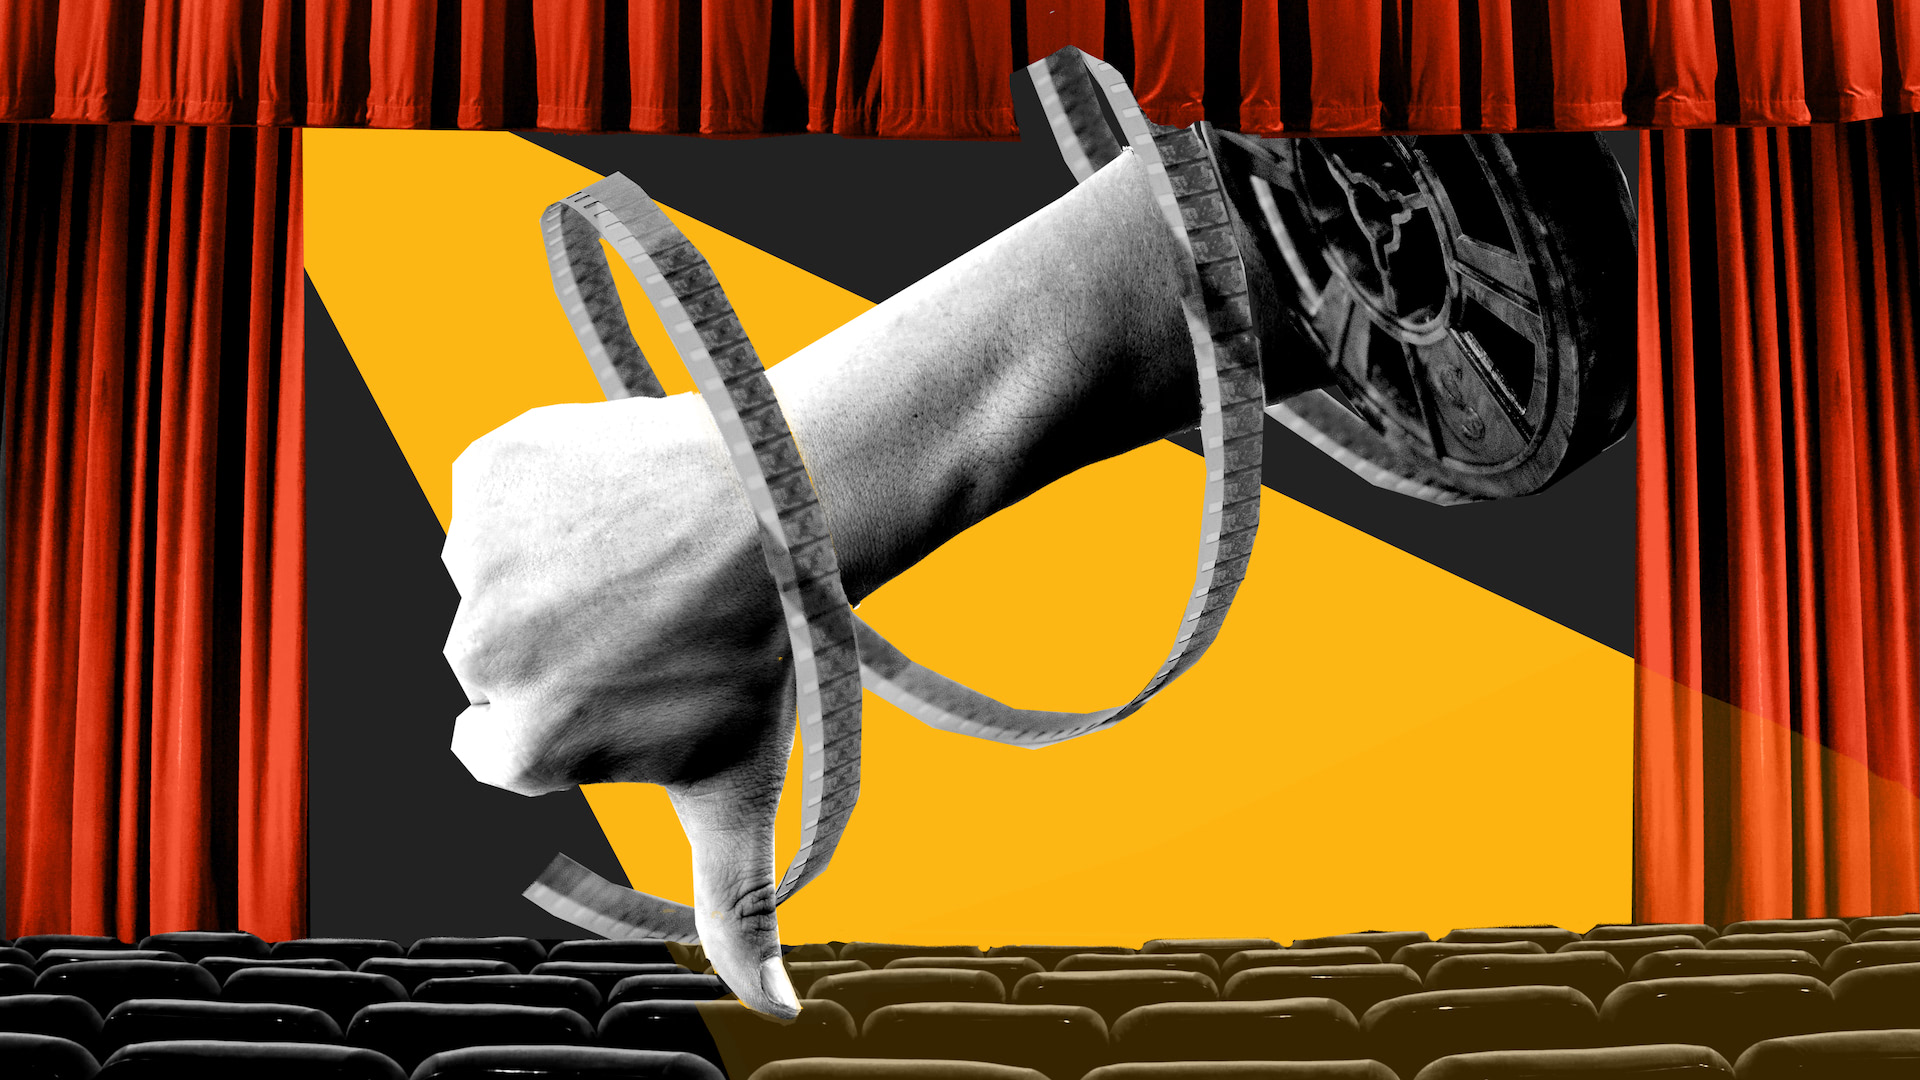 Empty theatre with an illustrated "thumbs down" hand with a cinema reel